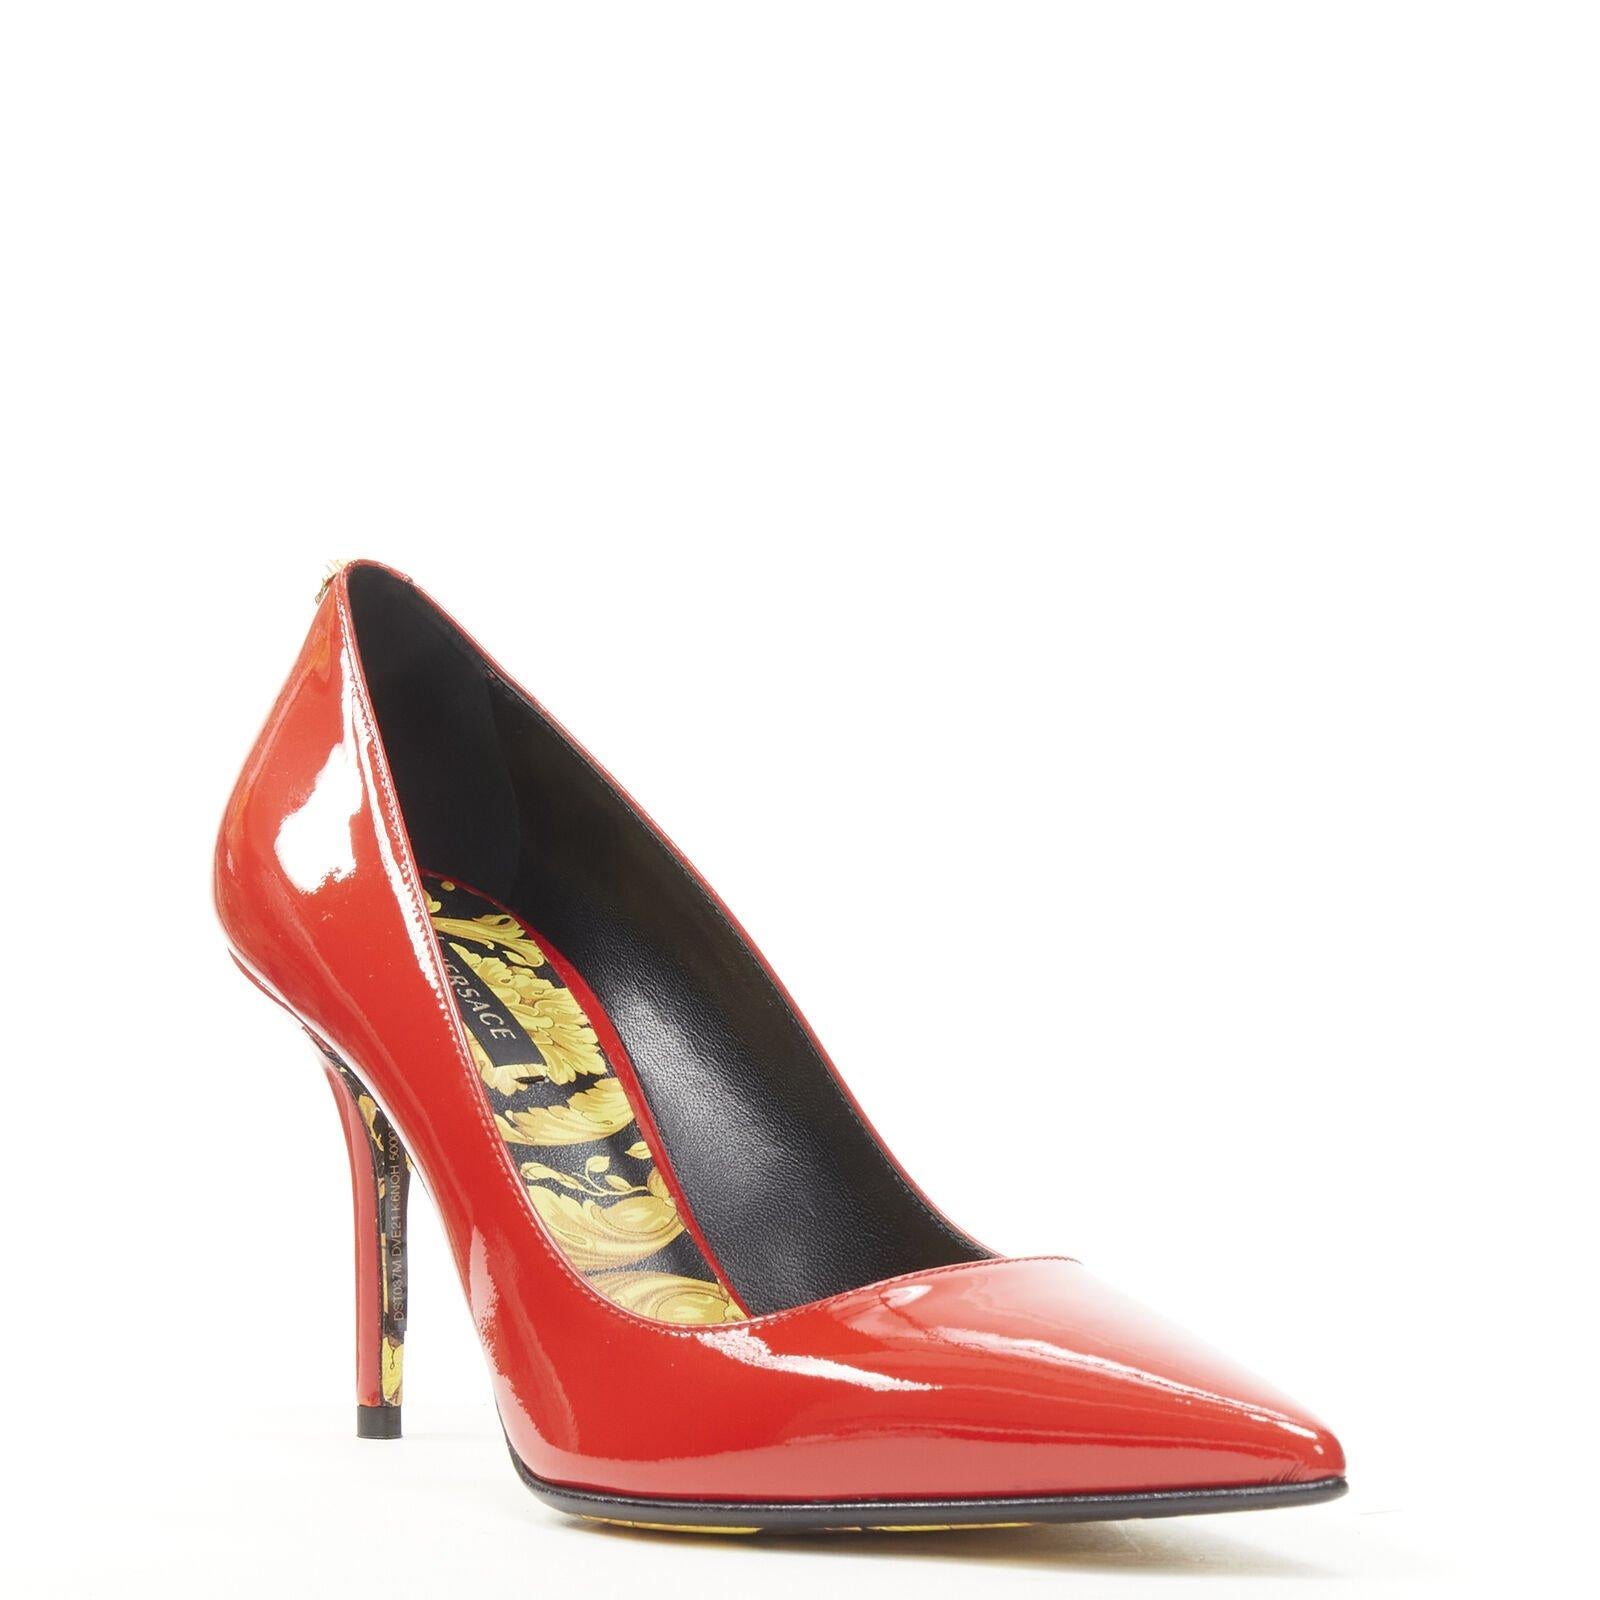 VERSACE Hibiscus Barocco gold sole red patent Medusa stud pump EU37.5 US7.5
Reference: TGAS/C01059
Brand: Versace
Designer: Donatella Versace
Model: DST037M DVE21 K5NOH
Collection: Hibiscus Barocco
Material: Patent Leather
Color: Red, Gold
Pattern: